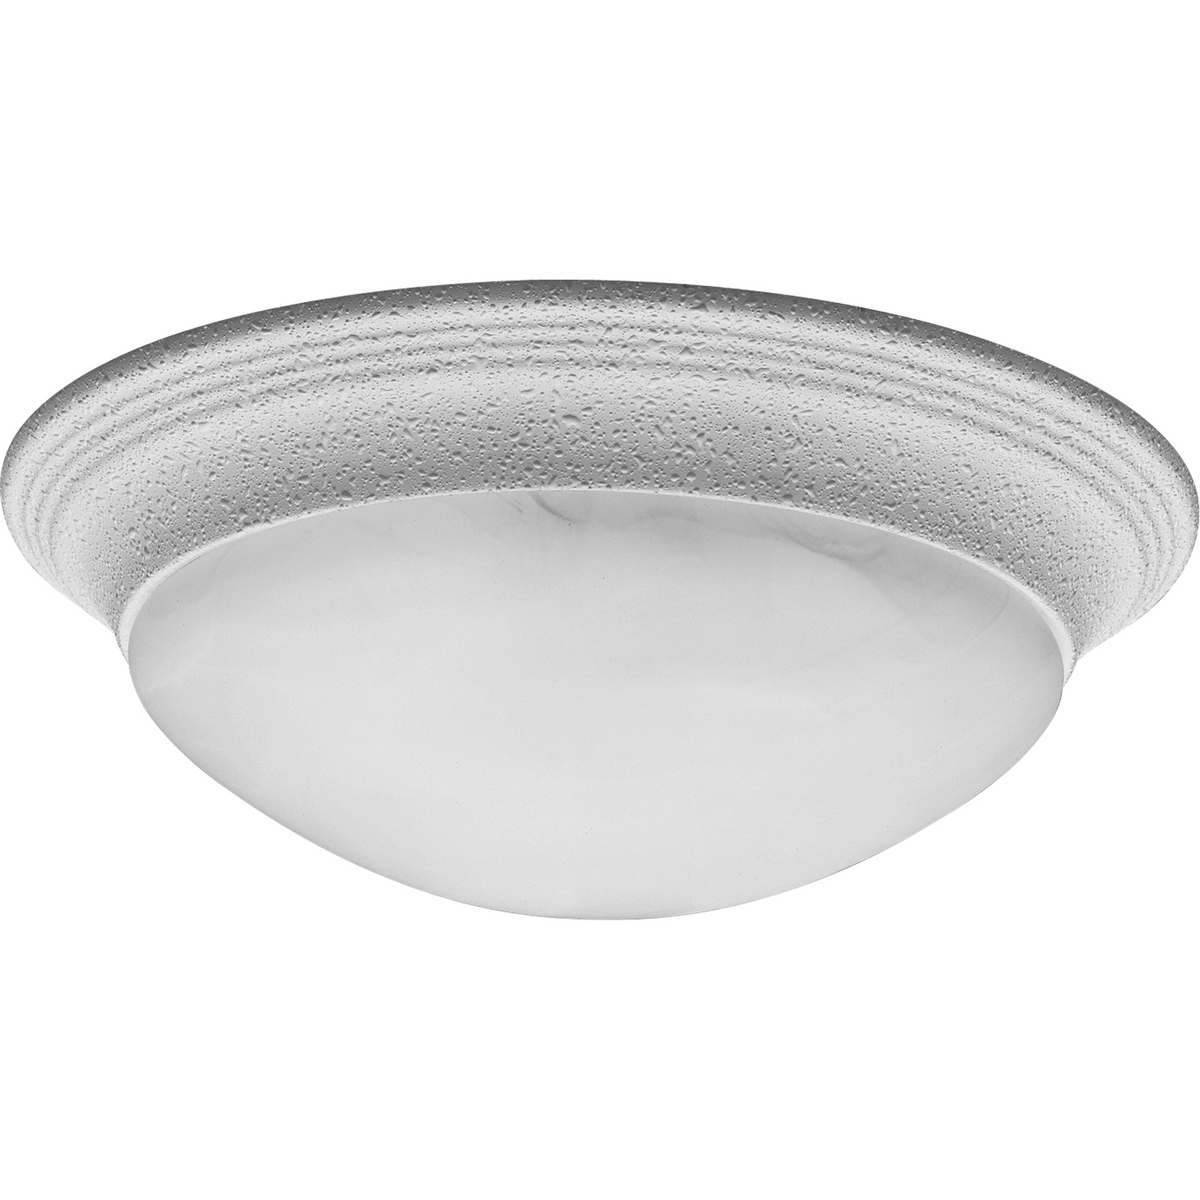 Two-light 14 inch close-to-ceiling fixture with etched alabaster style glass bowl and White finish. Twist on glass for easy relamping. This fixture is perfect for bedrooms, closets, pantries, hallways and many other areas of the home. The simple styling coordinates with many different looks throughout the home.